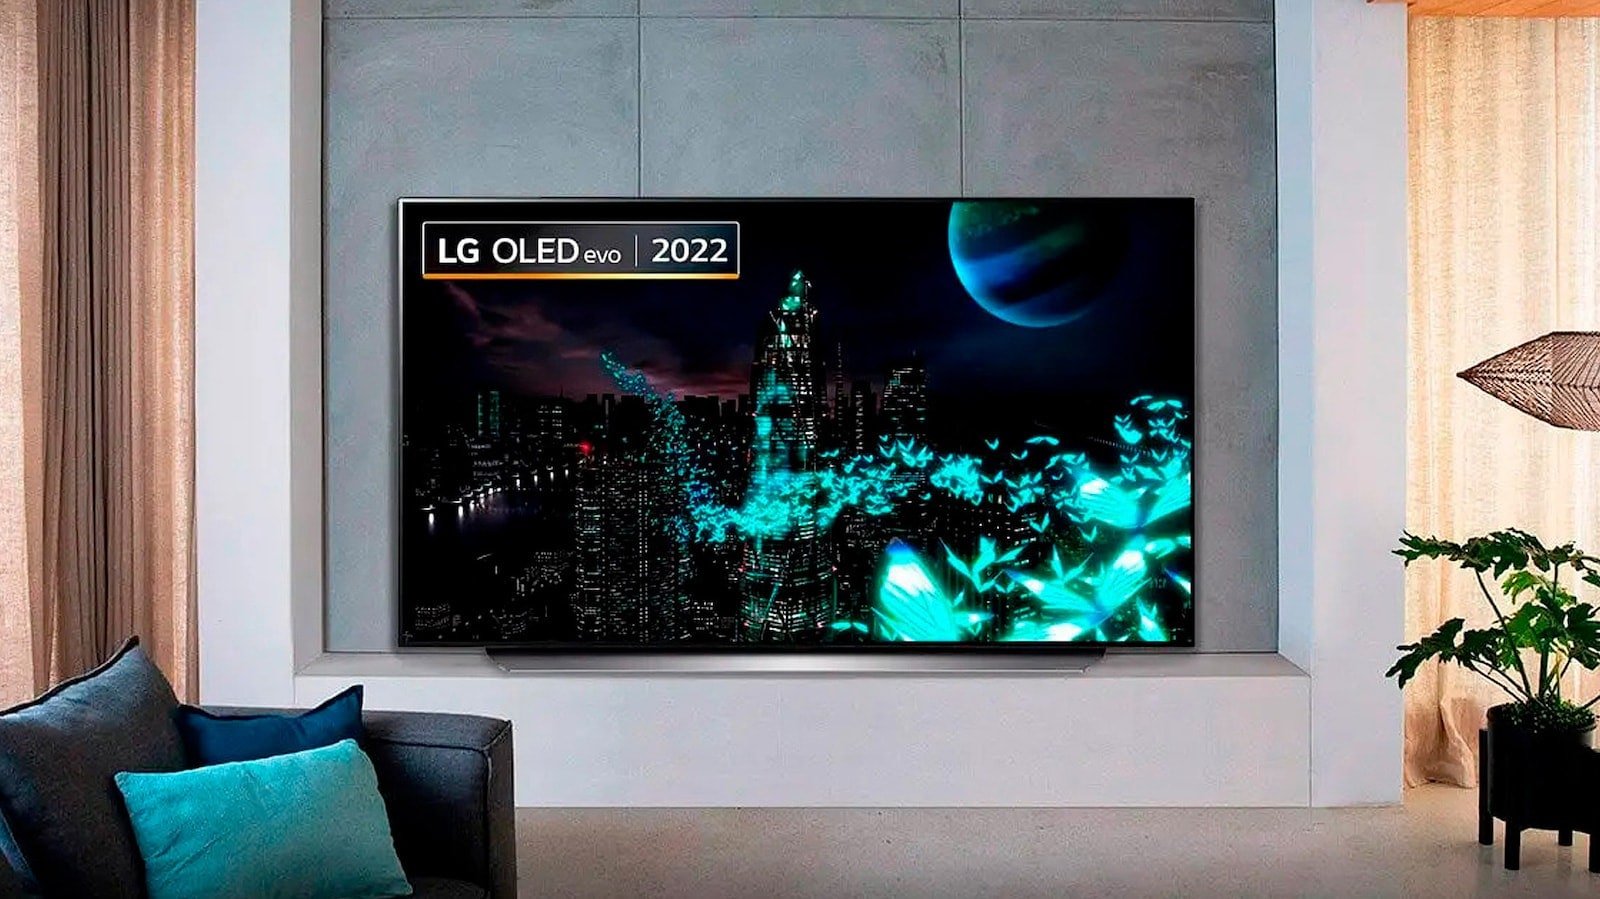 LG C2 evo OLED TV series offers 6 sizes with amazing picture clarity and detailed images